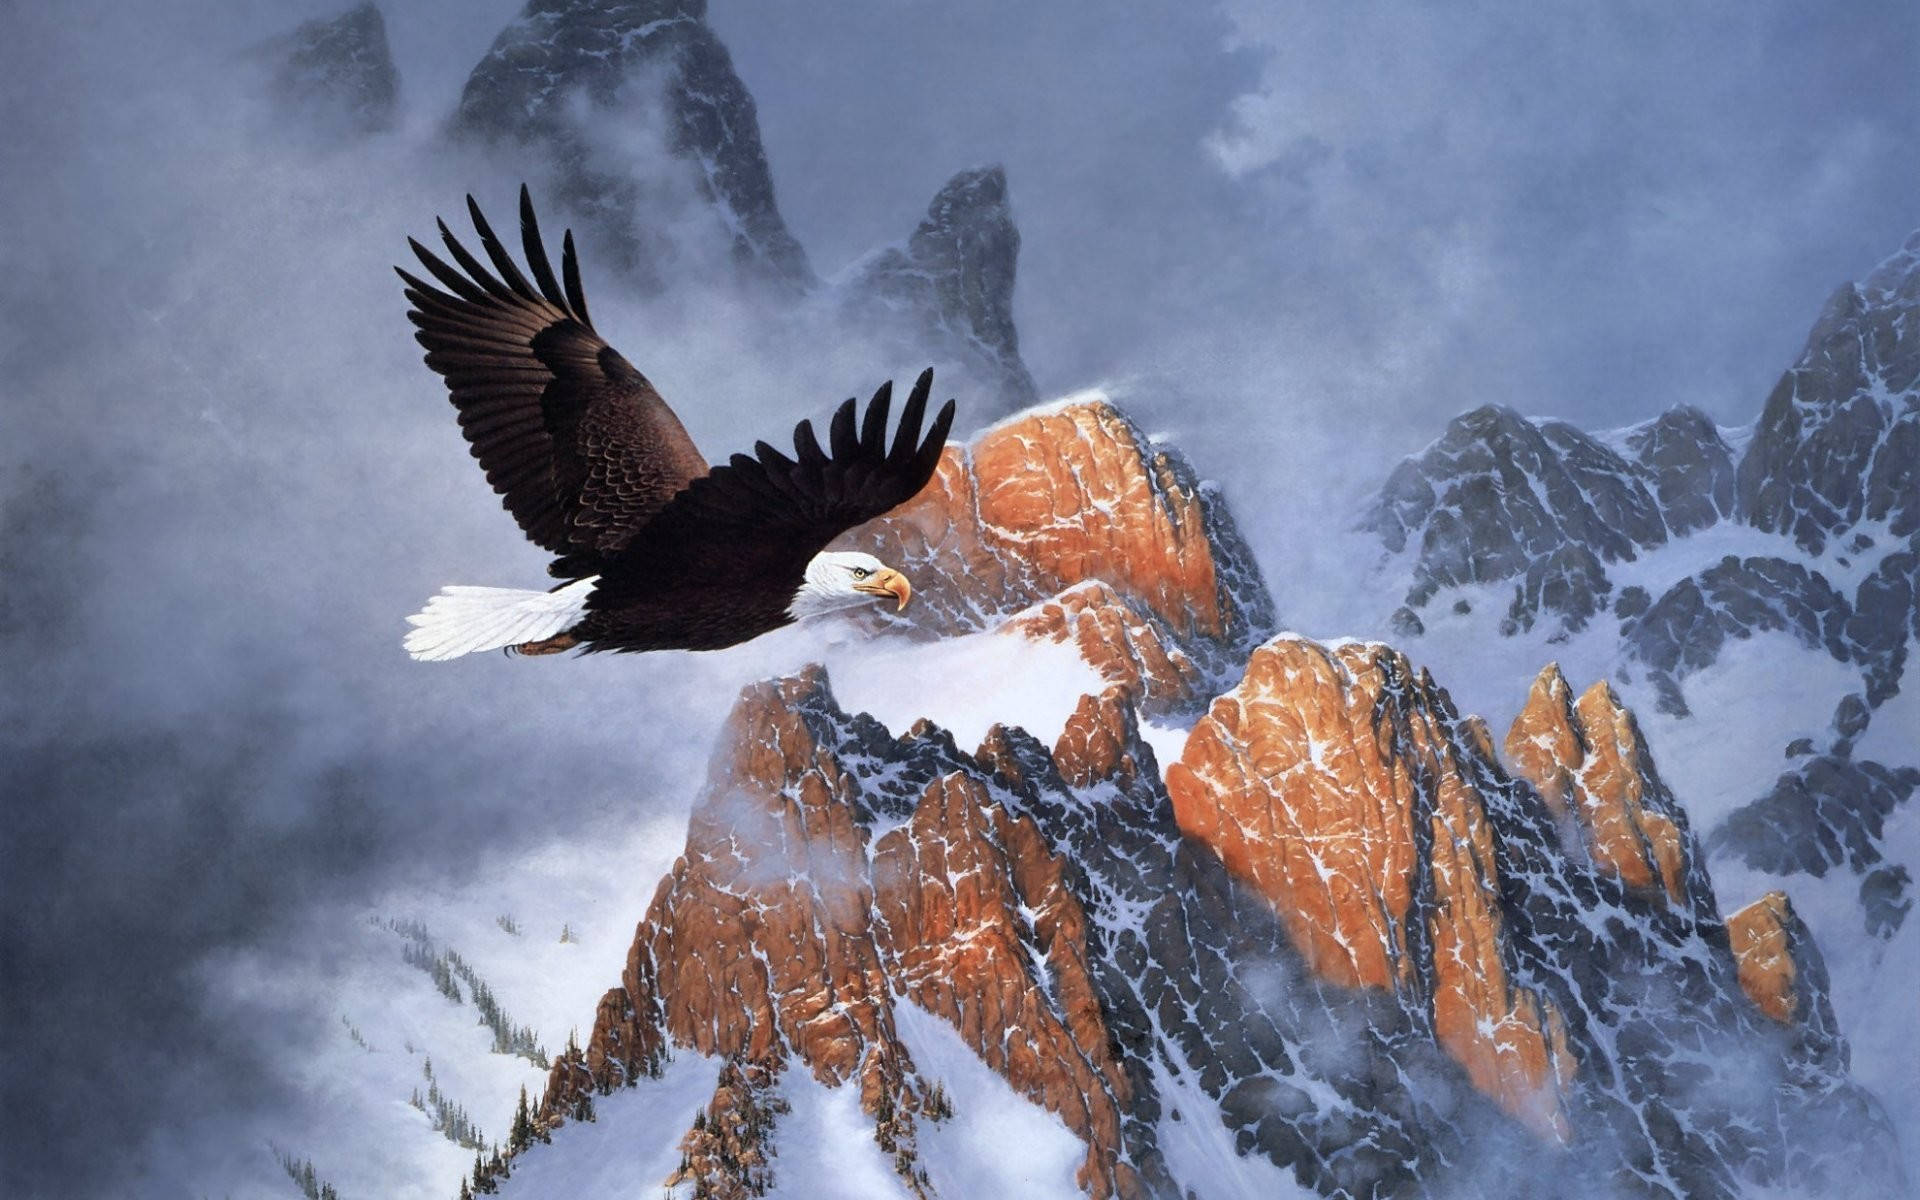 Bald Eagle Over Snow-capped Mountain Background